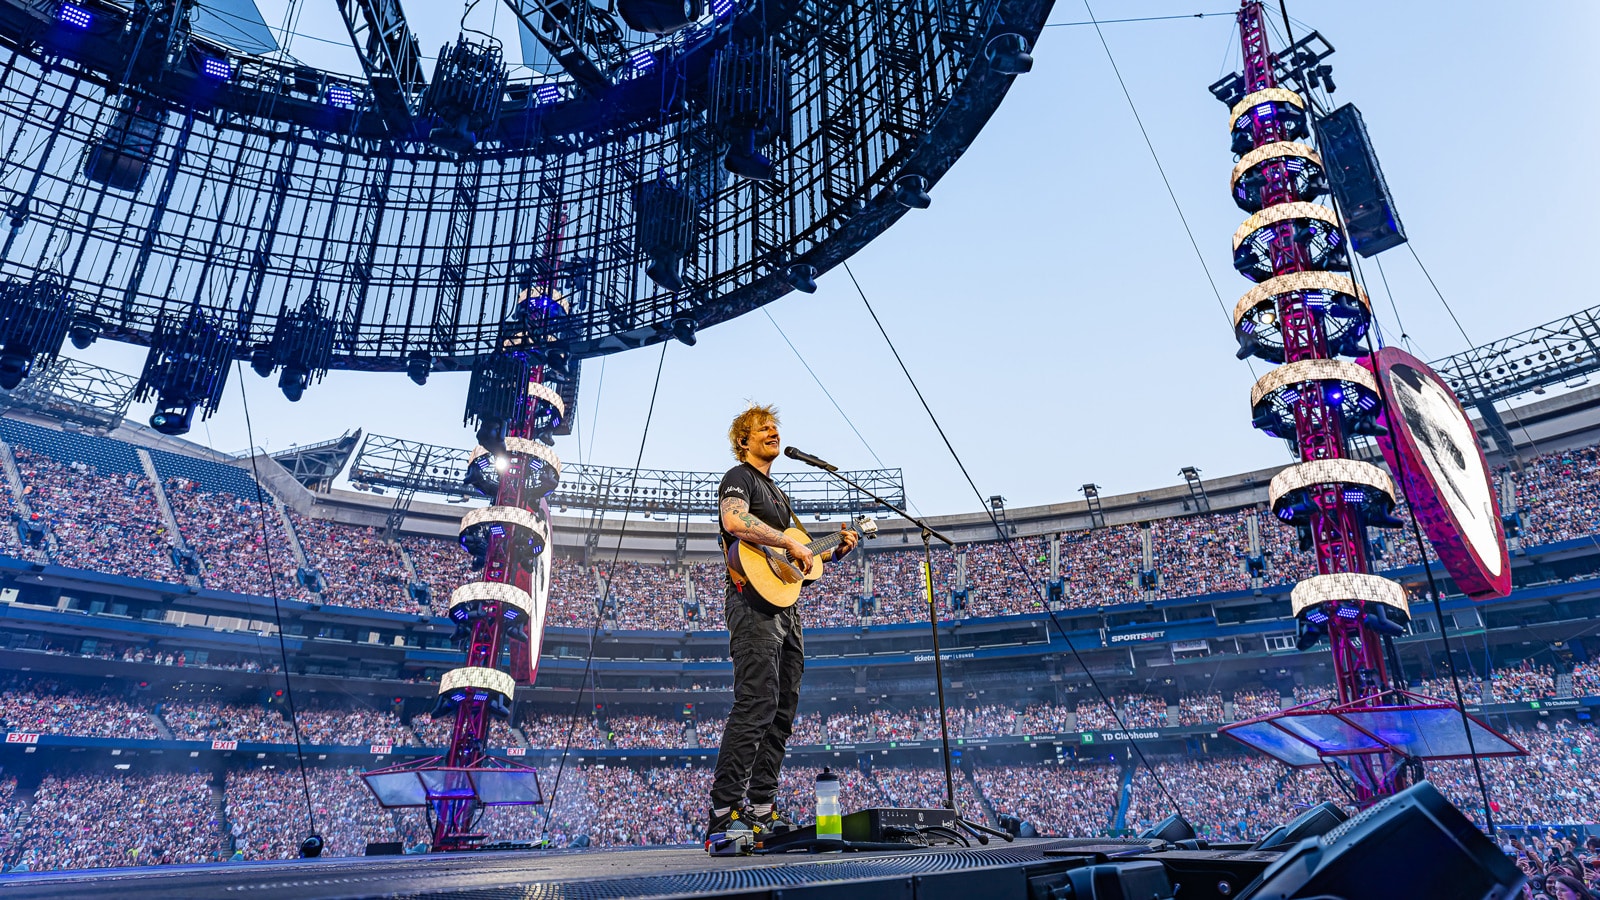 Meyer Sound PANTHER System for Ed Sheeran Tour Leverages Latest Technologies